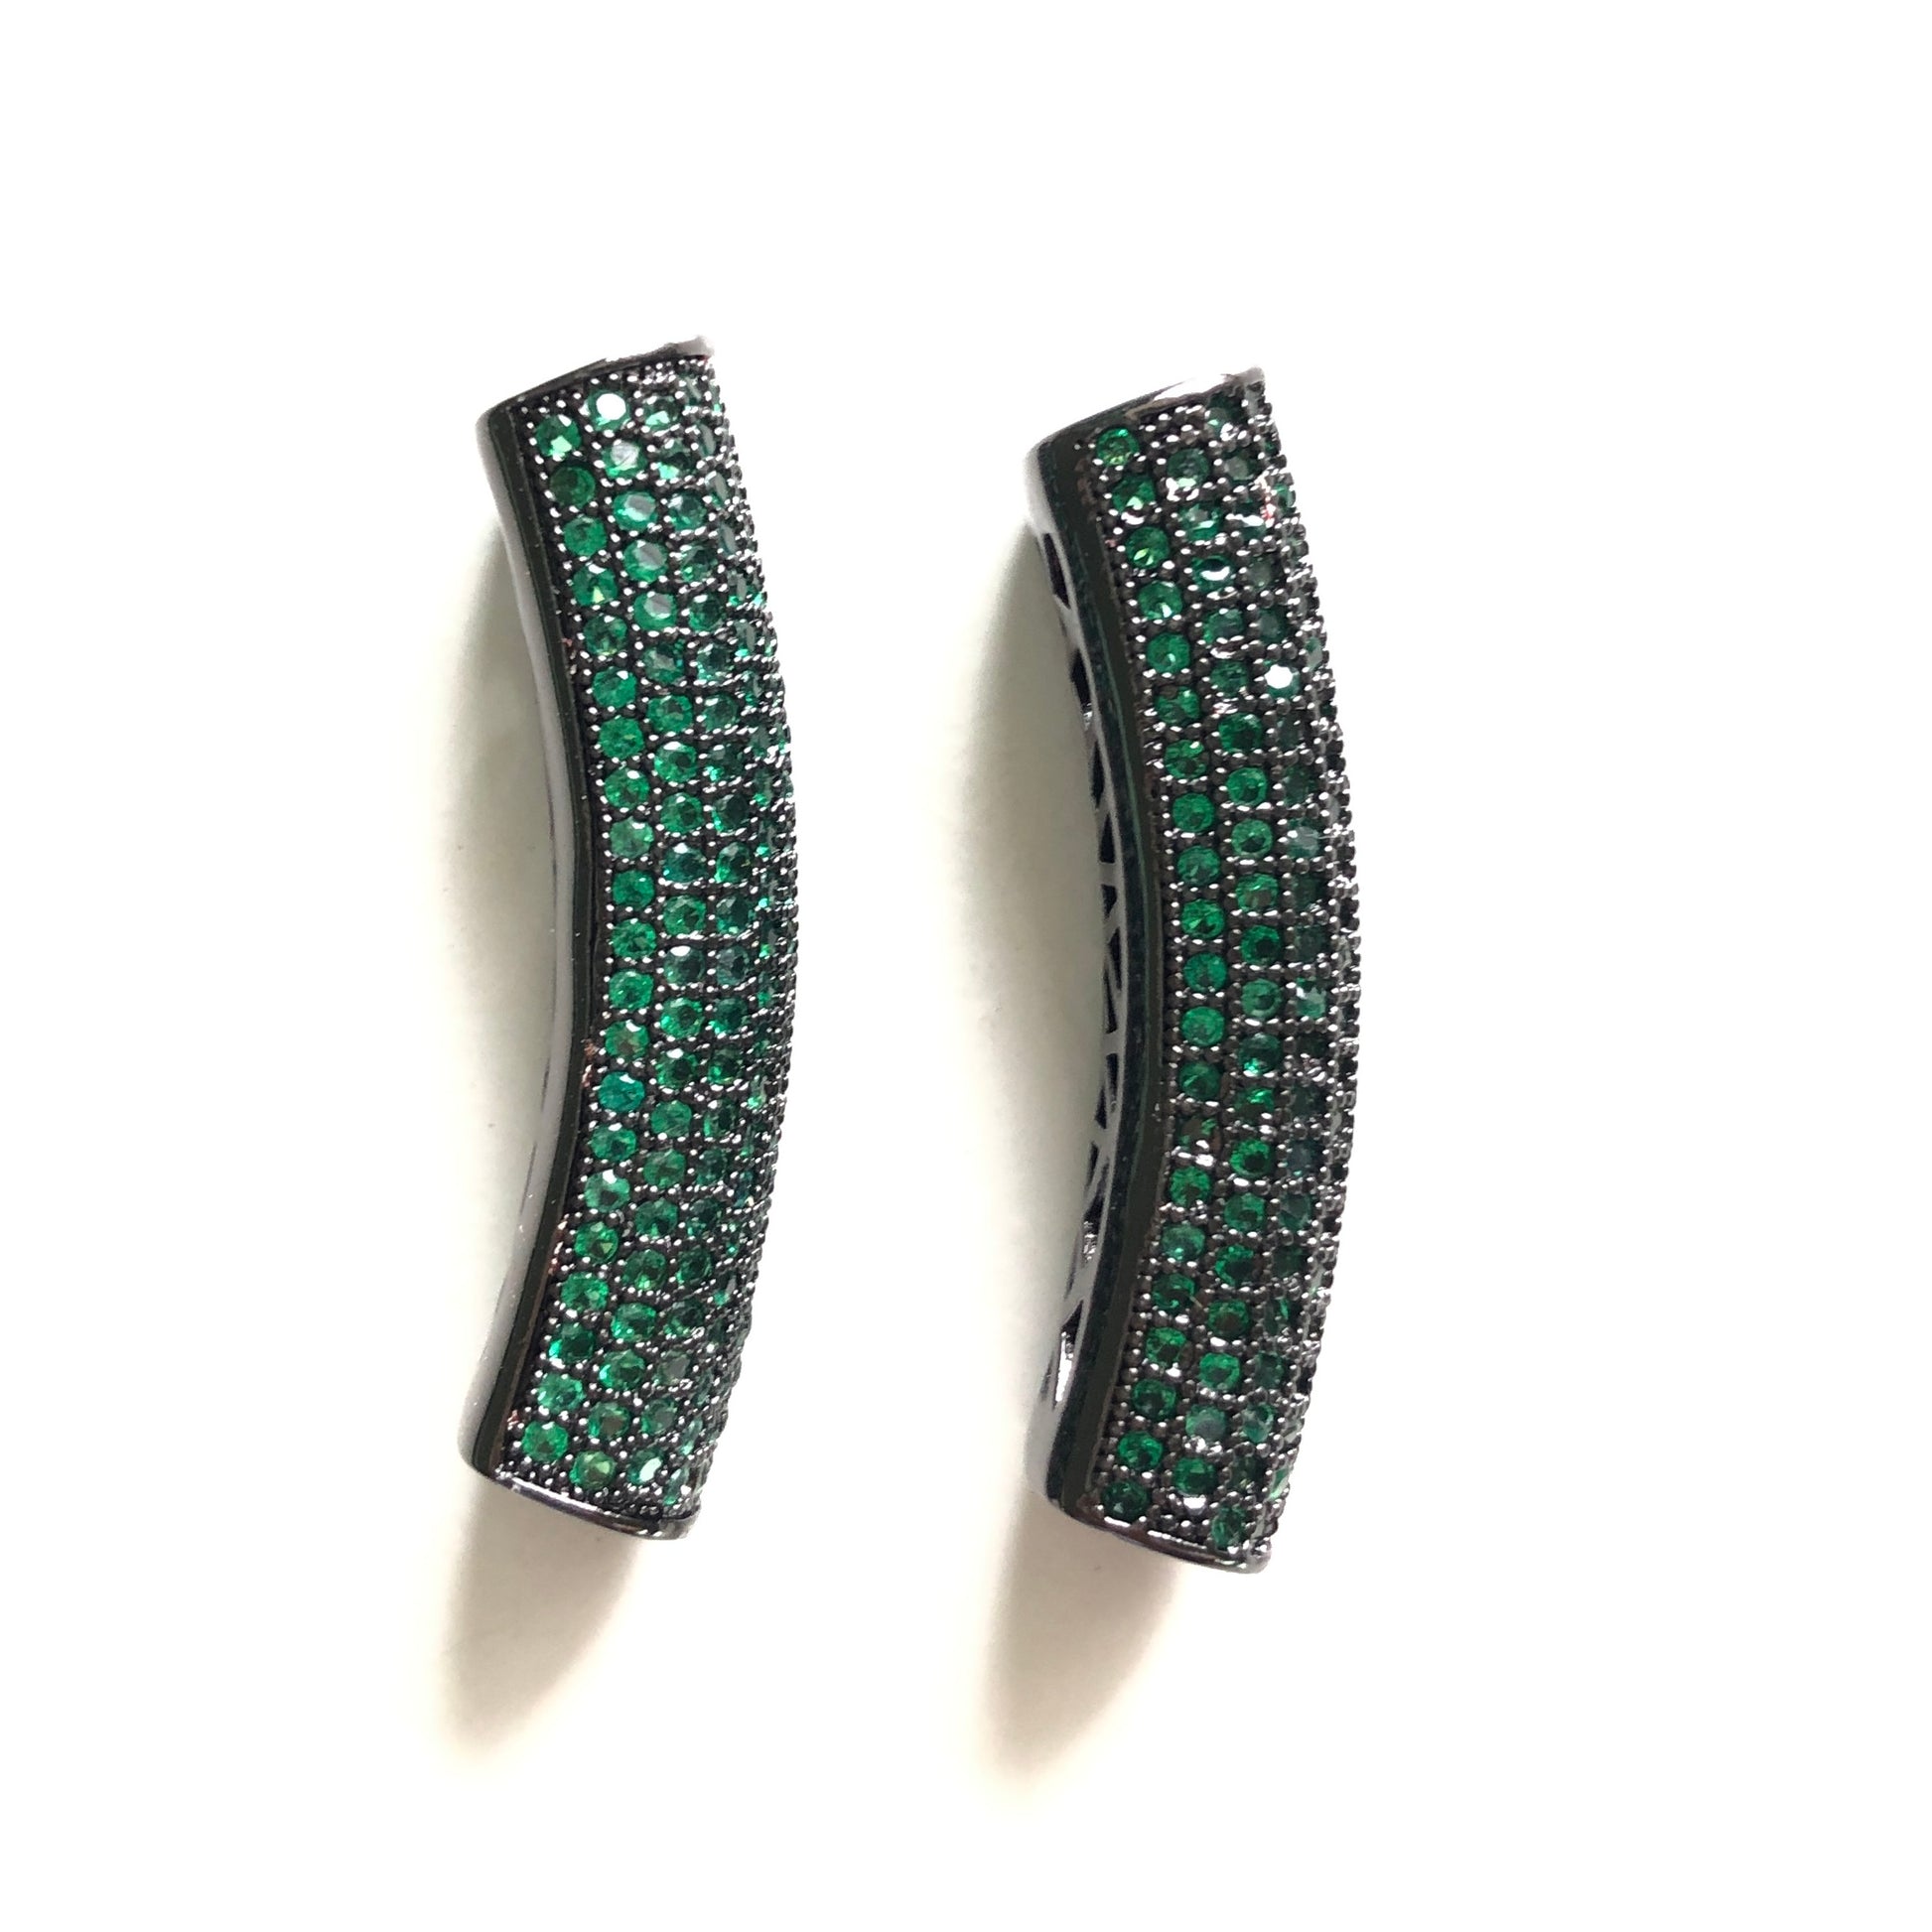 5-10pcs/lot 37.7*9mm Green CZ Paved Tube Bar Spacers Black CZ Paved Spacers Colorful Zirconia Tube Bar Centerpieces Charms Beads Beyond